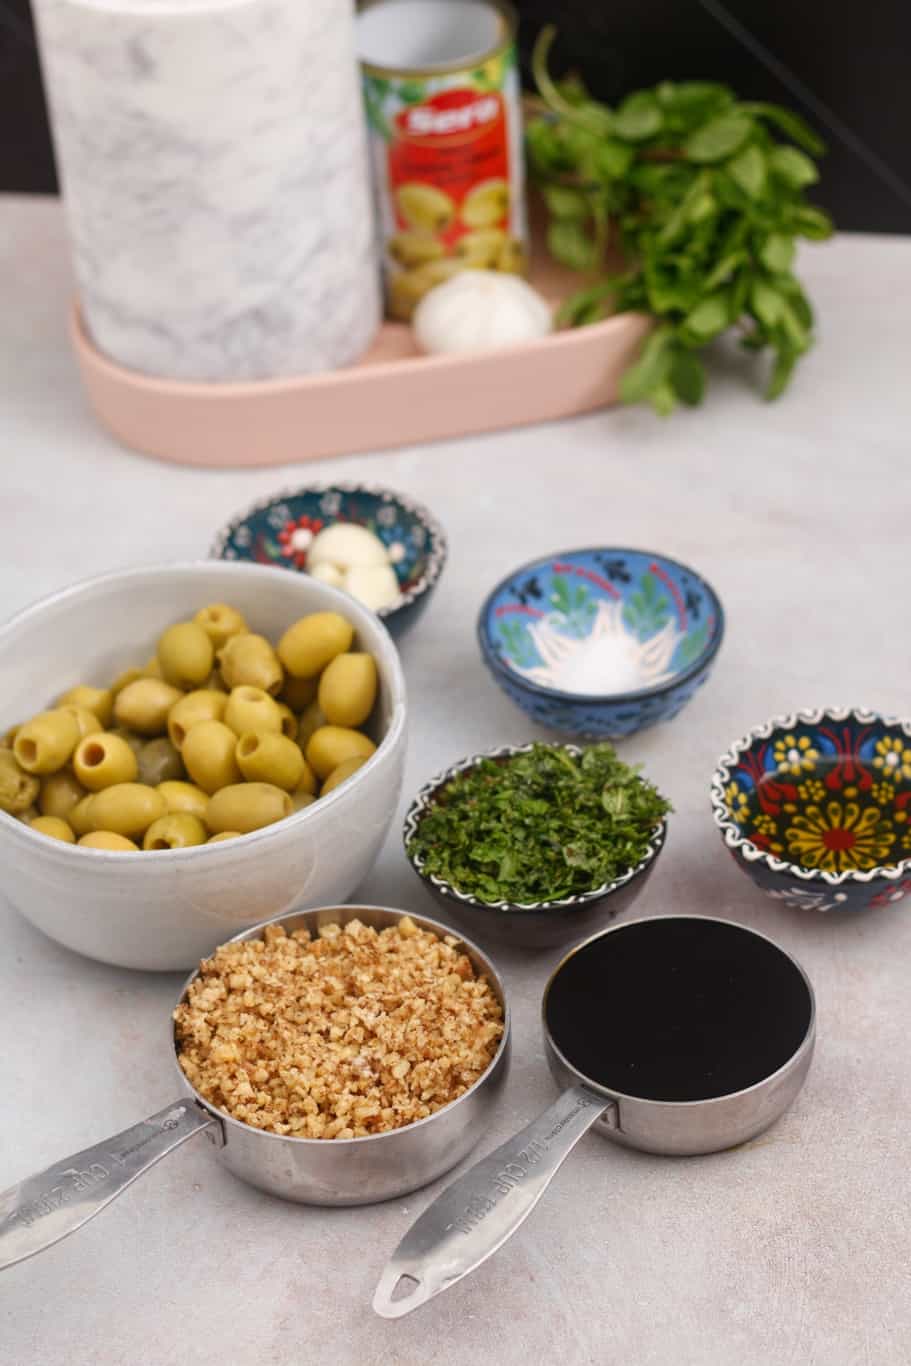 these are the ingredients to make Persian marinated olives recipe: green olives, olive oil, chopped walnuts, pomegranate molasses, garlic, and chopped fresh mint.